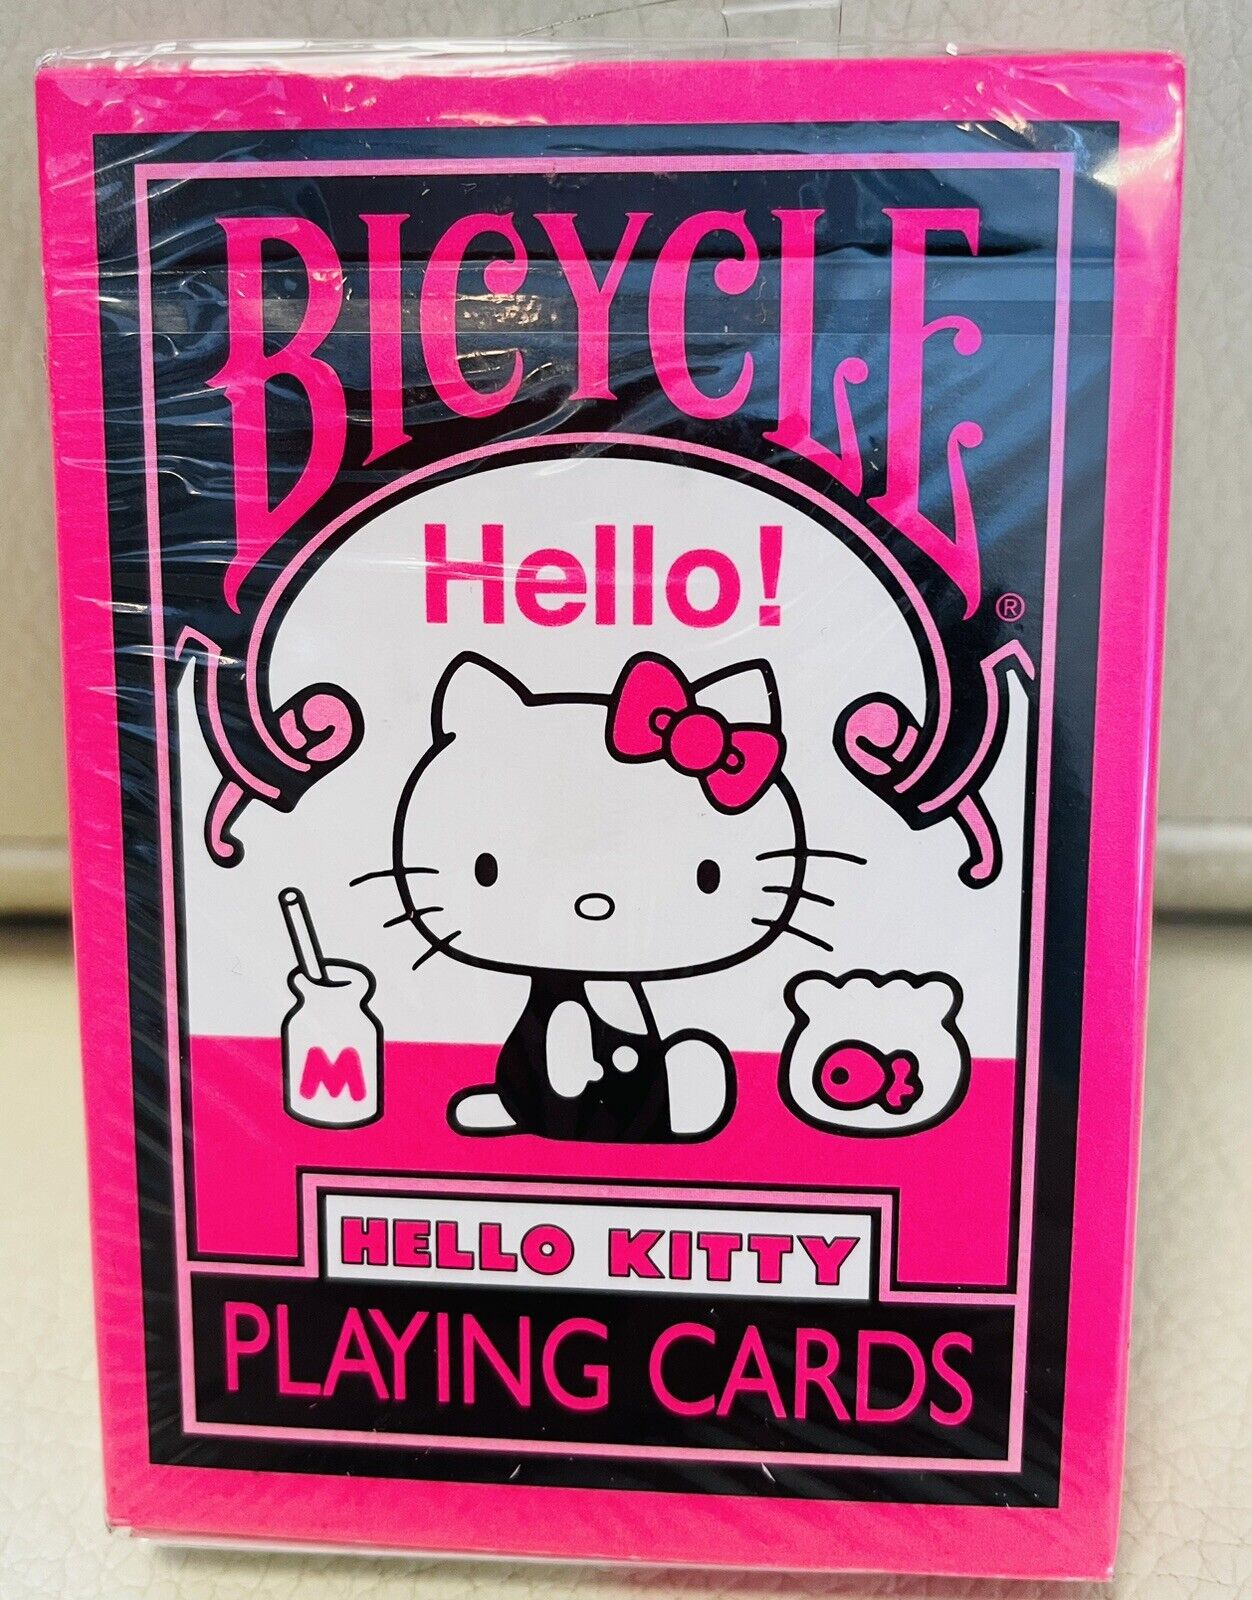 Bicycle Playing Cards Hello Kitty,From Japan.2021